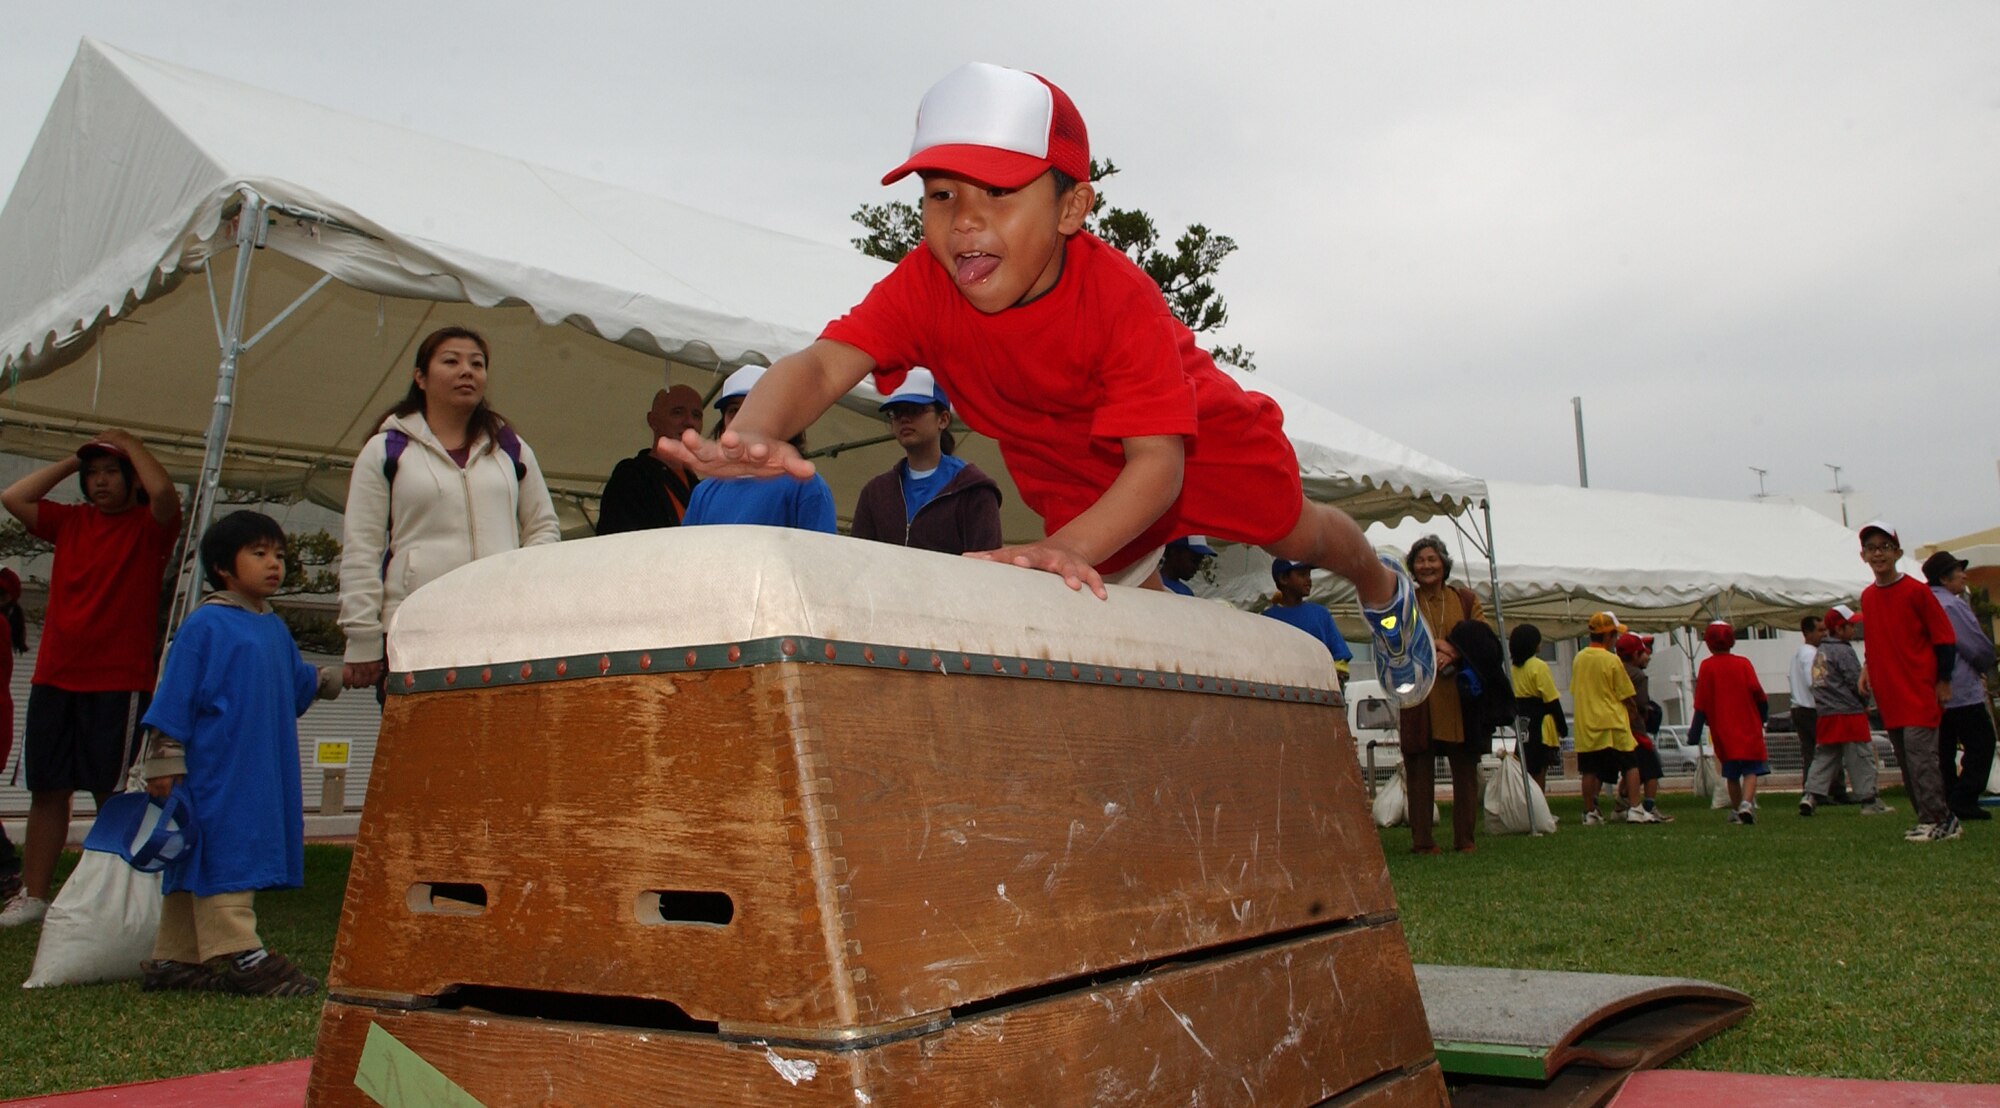 An Okinawan child takes part in an obstacle coarse during the U.S.-Japan
Sports and Cultural Exchange event at the Rotary Plaza in Okinawa, Japan,
March 14.  (U.S. Air Force photo/Tech. Sgt. Rey Ramon) 